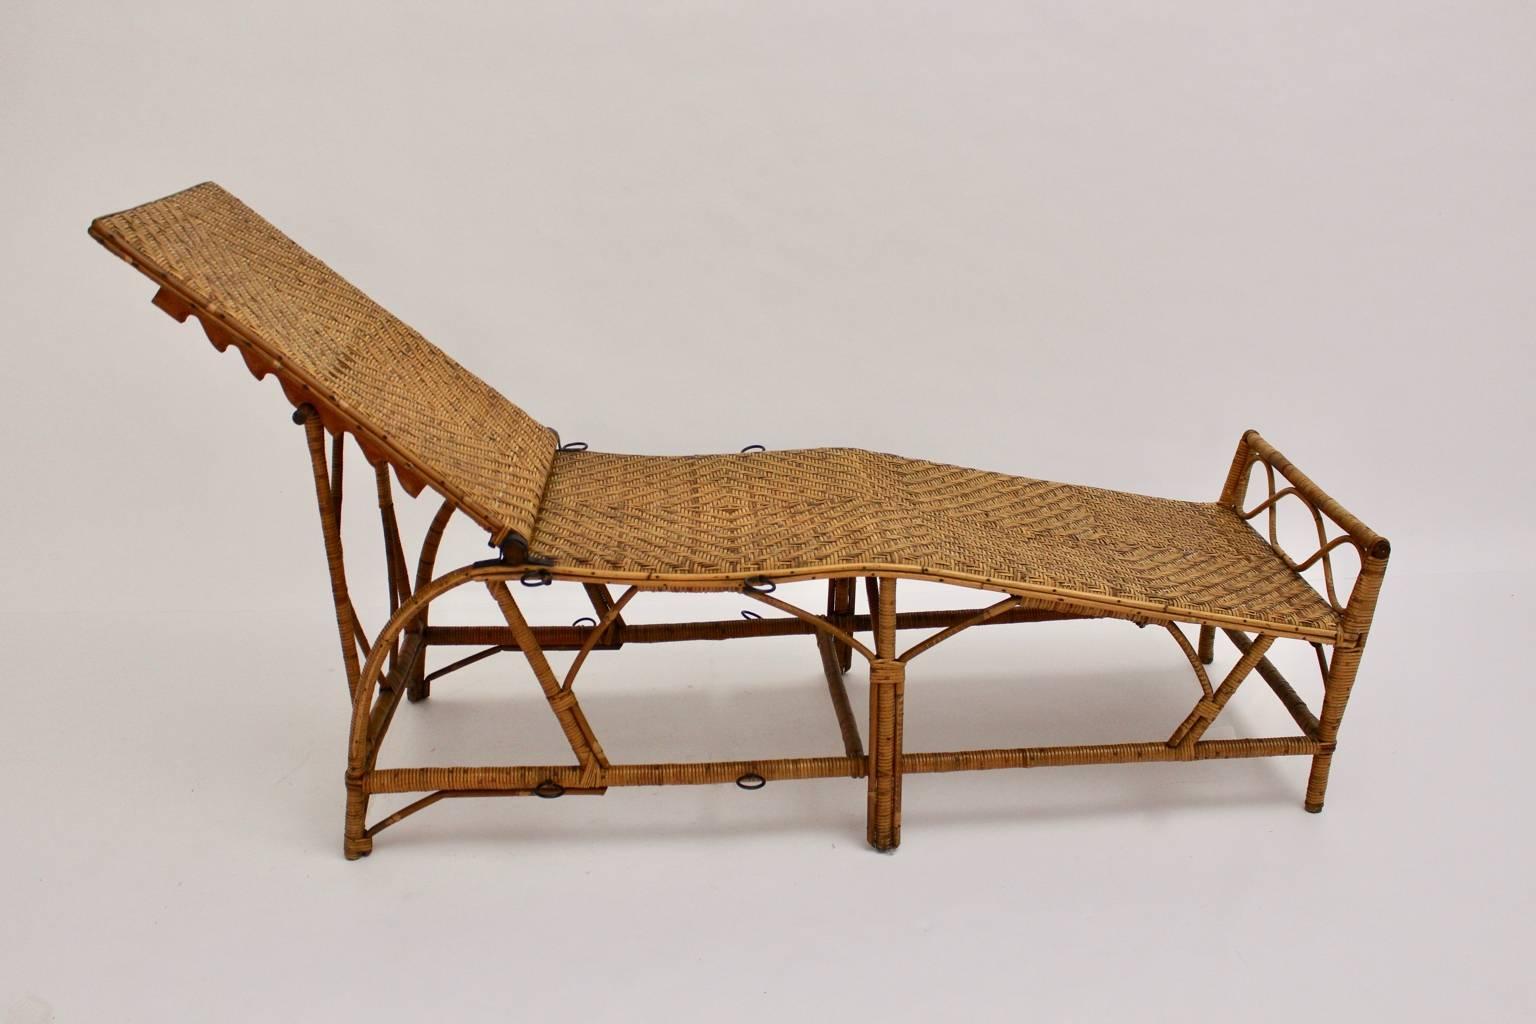 Rattan Art Deco Vintage Chaise Longue by Perret & Vibert Attributed France 1920s For Sale 2